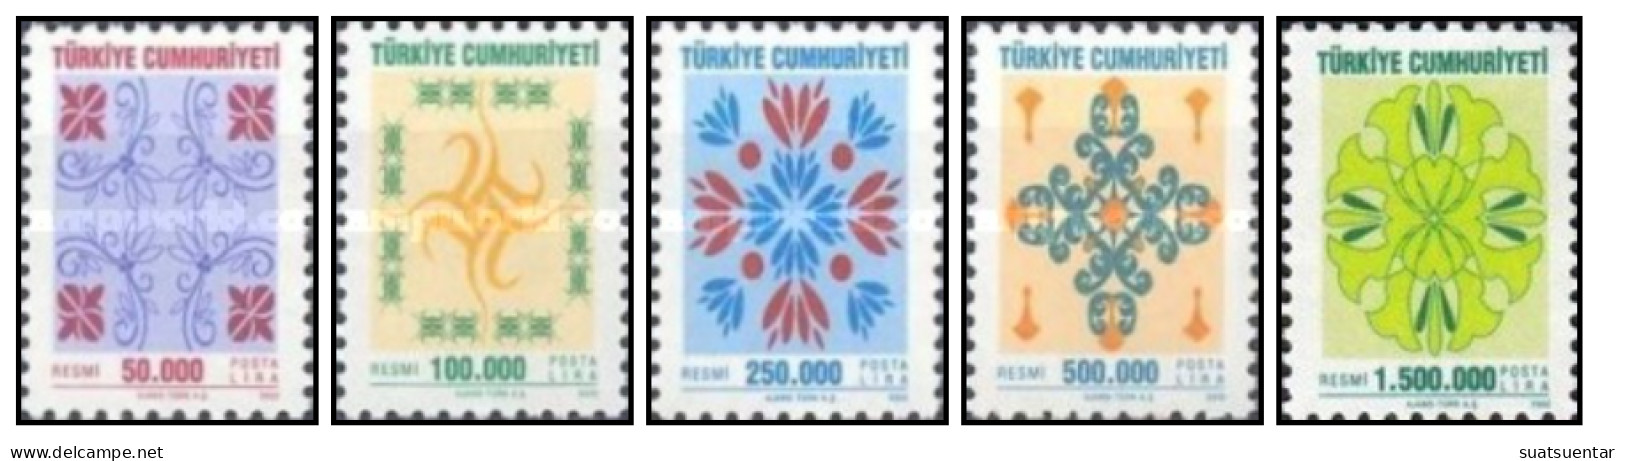 2002 Official Stamps - New Designs MNH - Timbres De Service